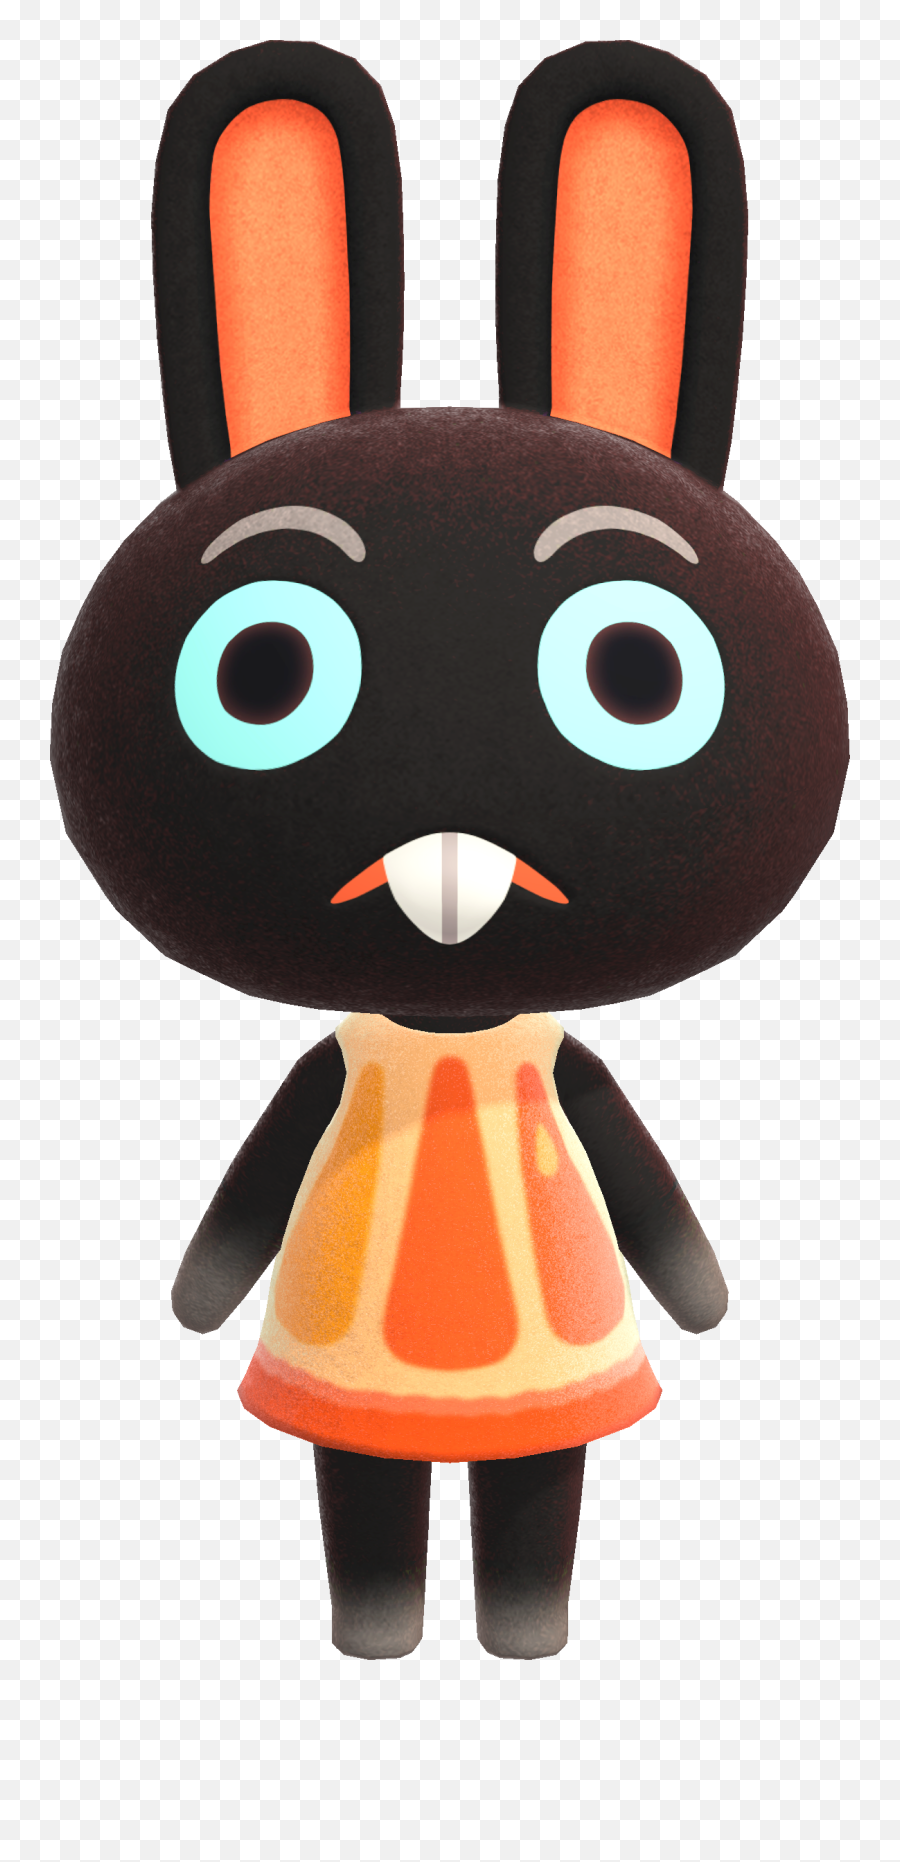 Who Is The Best D - Tier Ftier Villager In Animal Crossing Cole Animal Crossing Emoji,Hangouts Bunny Emoticons